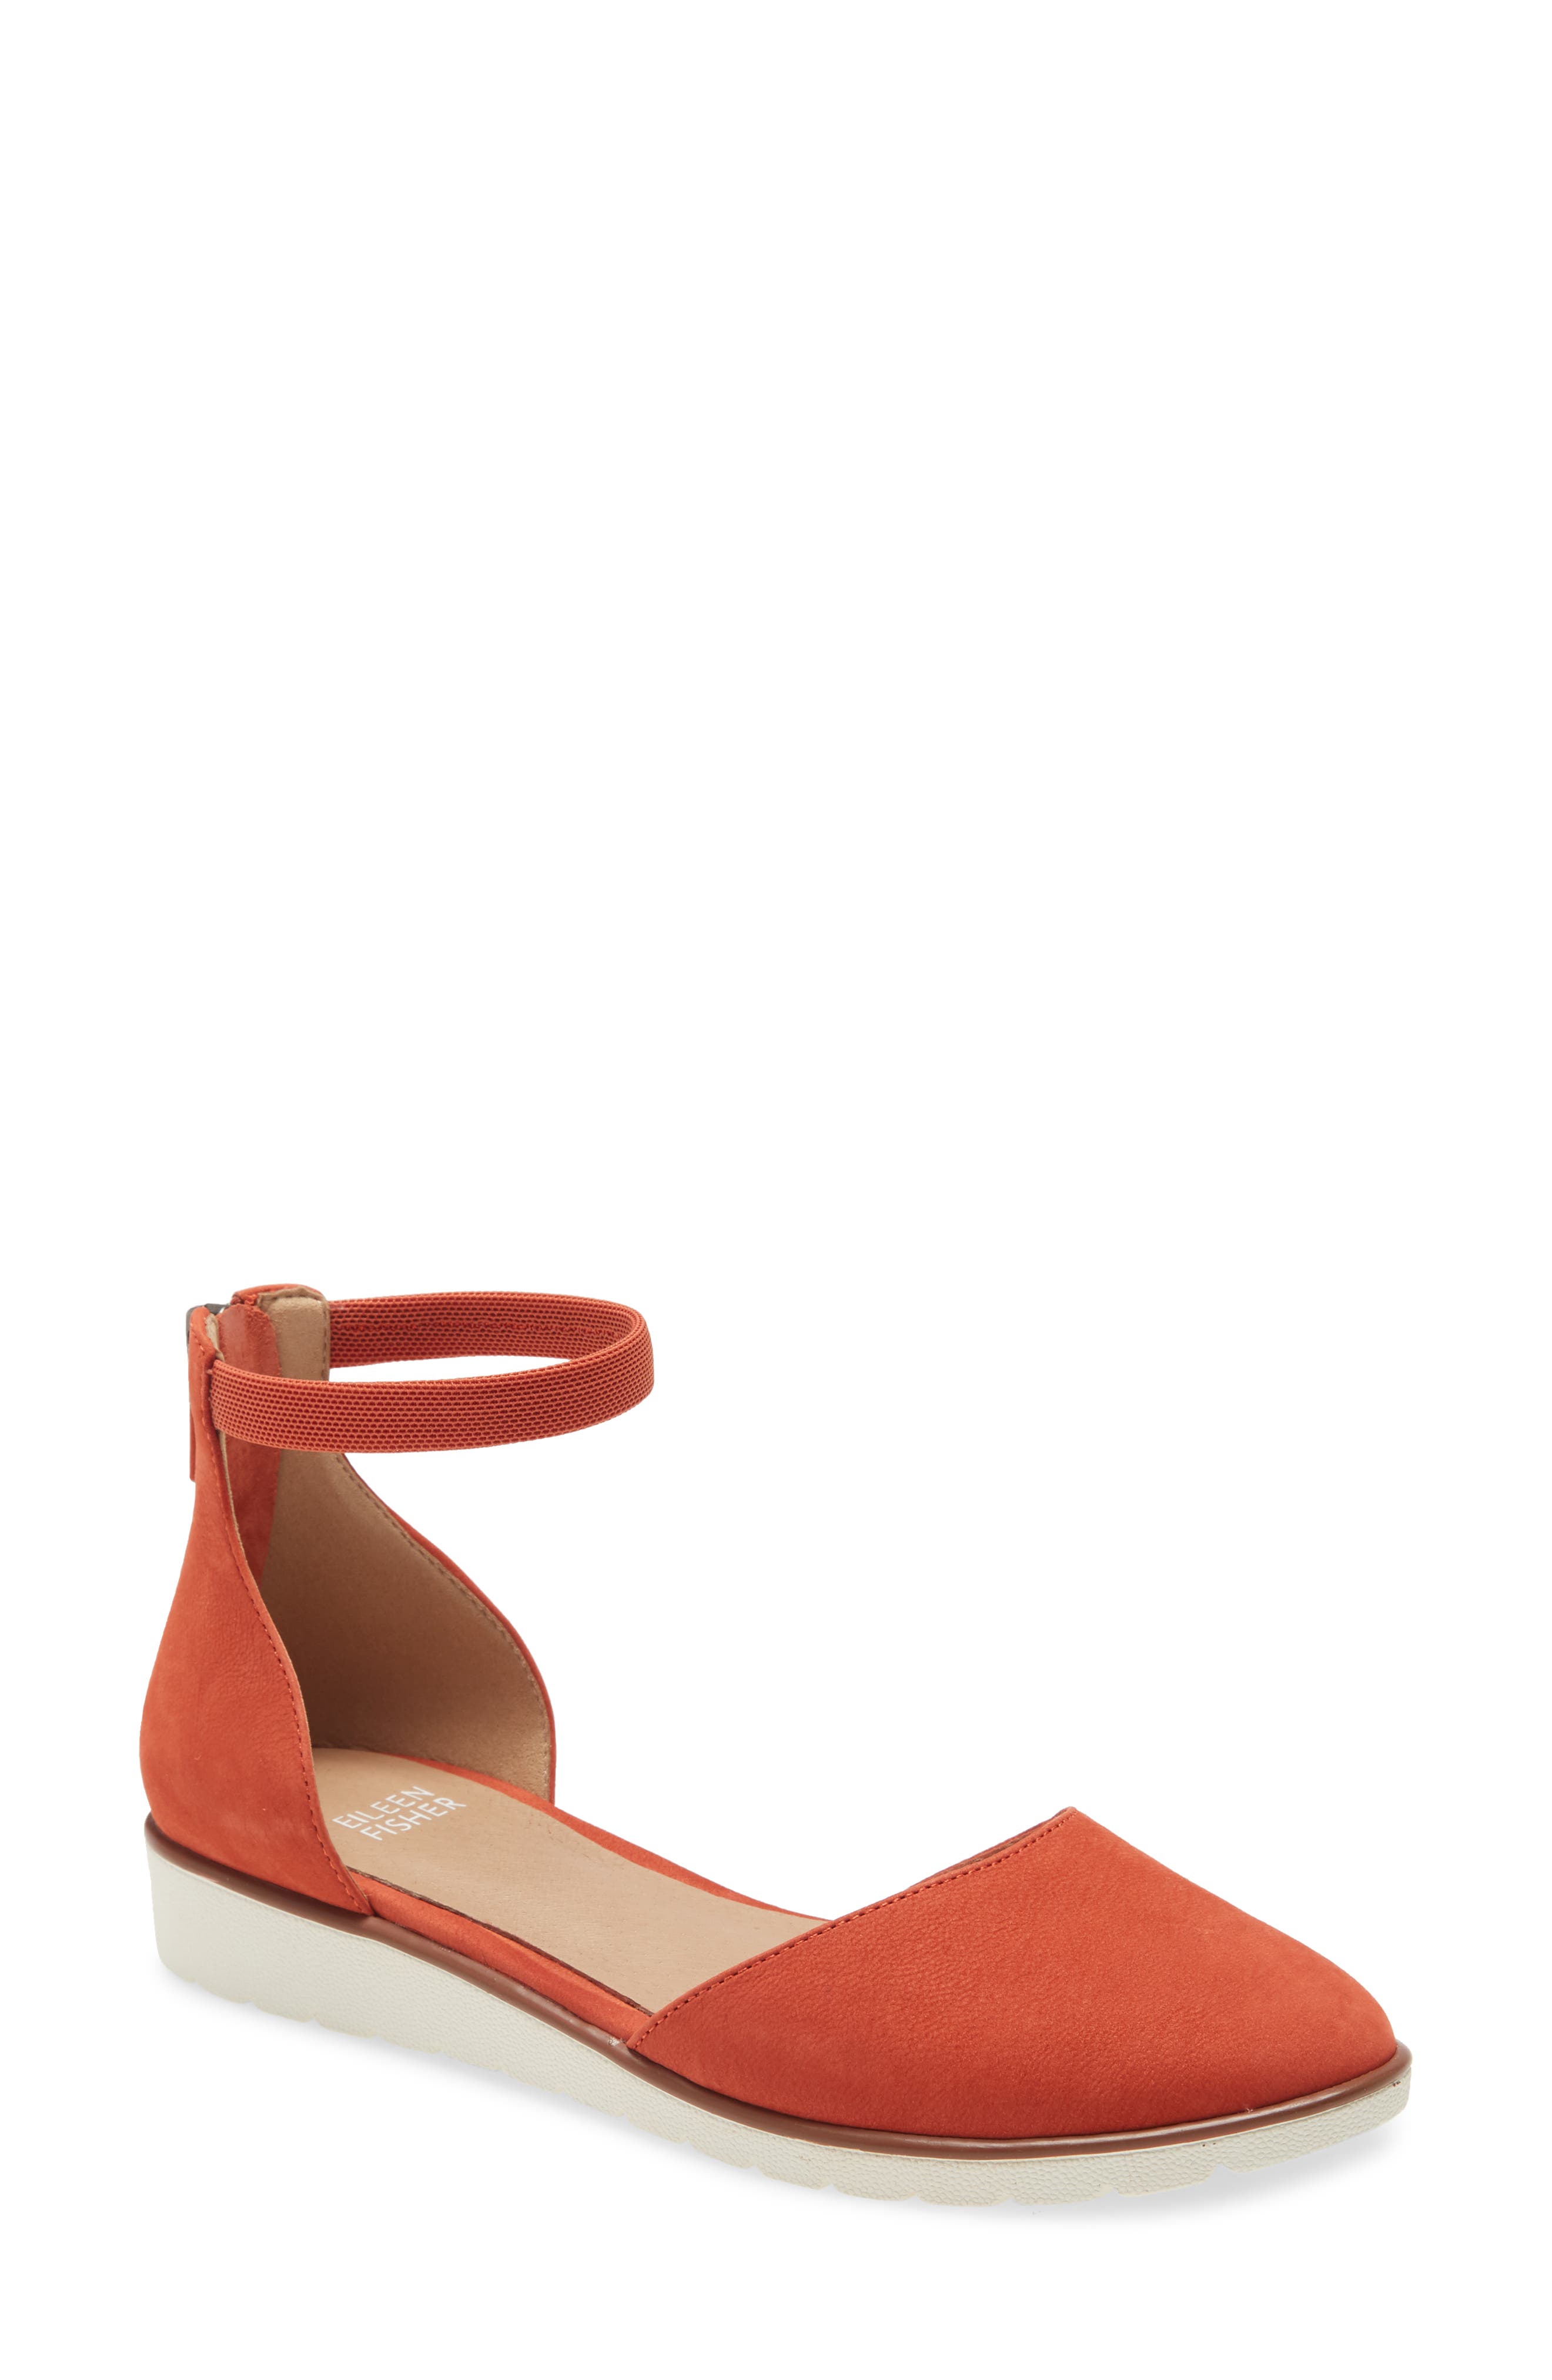 EILEEN FISHER ANKLE STRAP WEDGE,784239701036